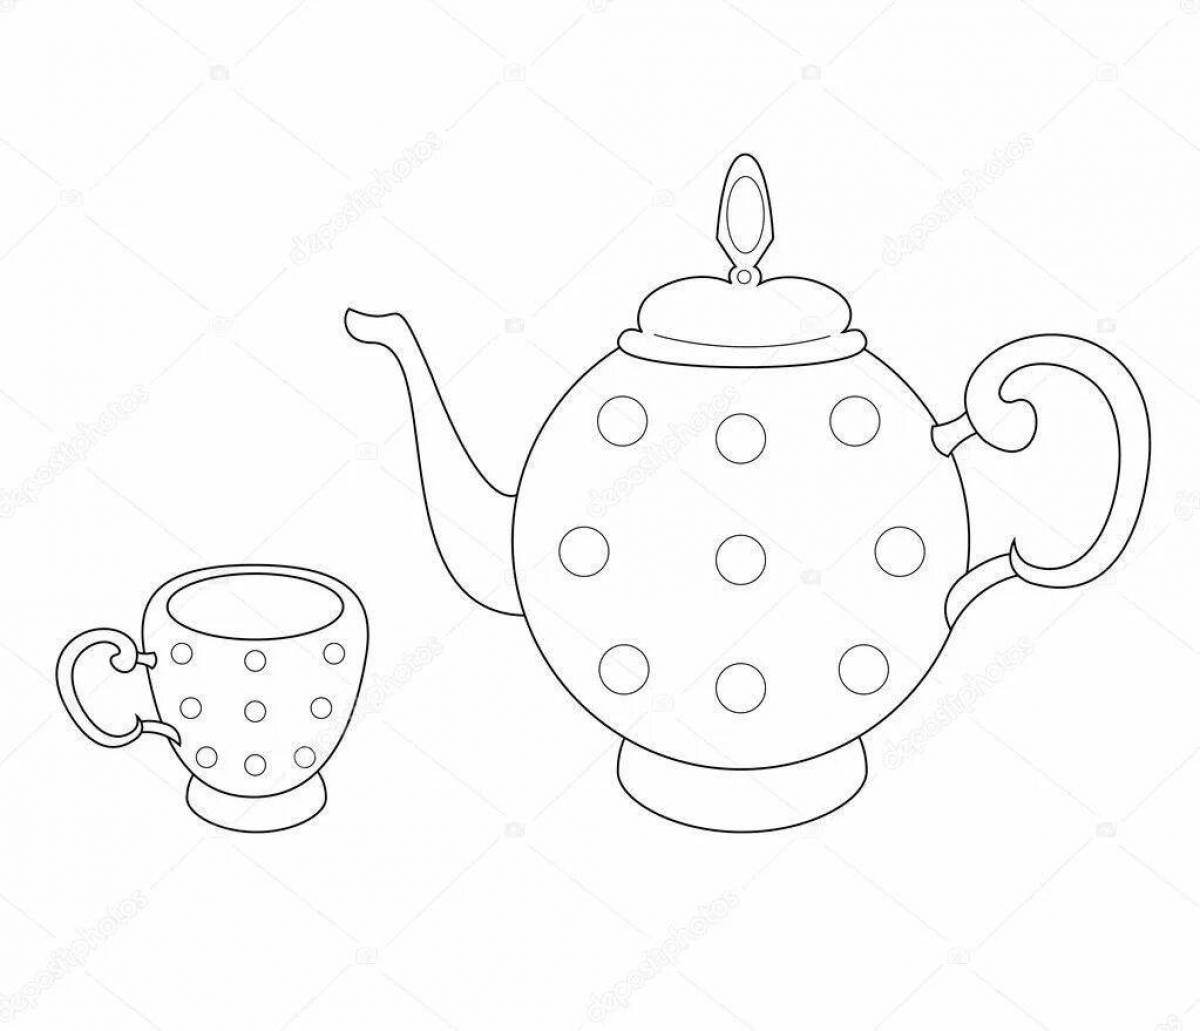 Coloring page exquisite teapot and mug